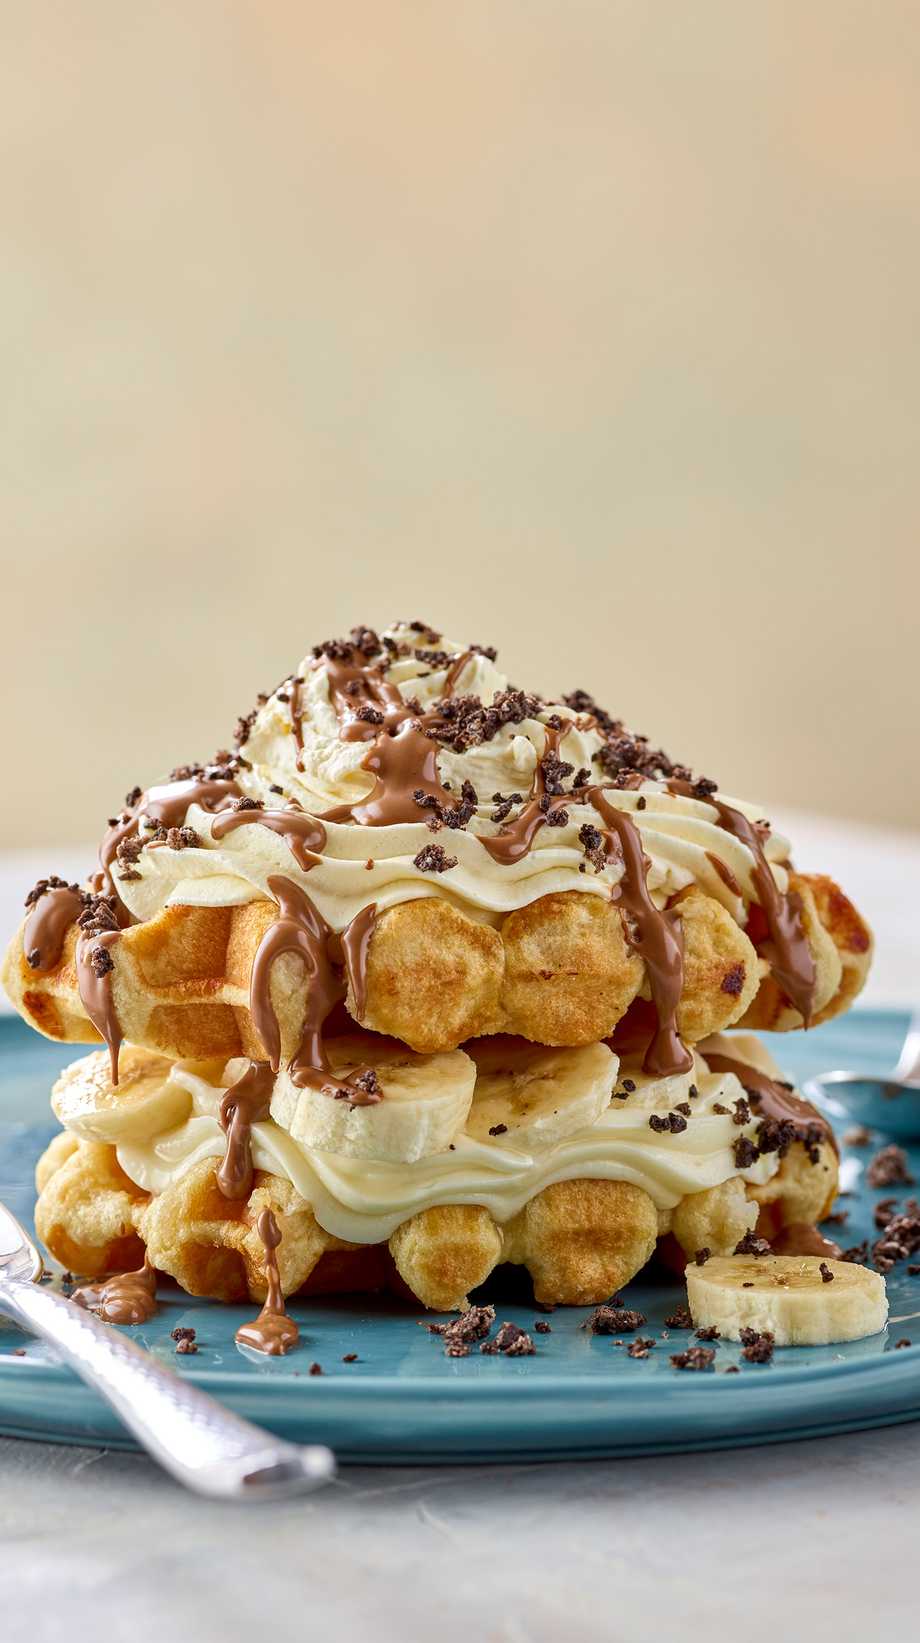 Waffles are covered with cream and chocolate on a blue plate. Two spoons are by its side.